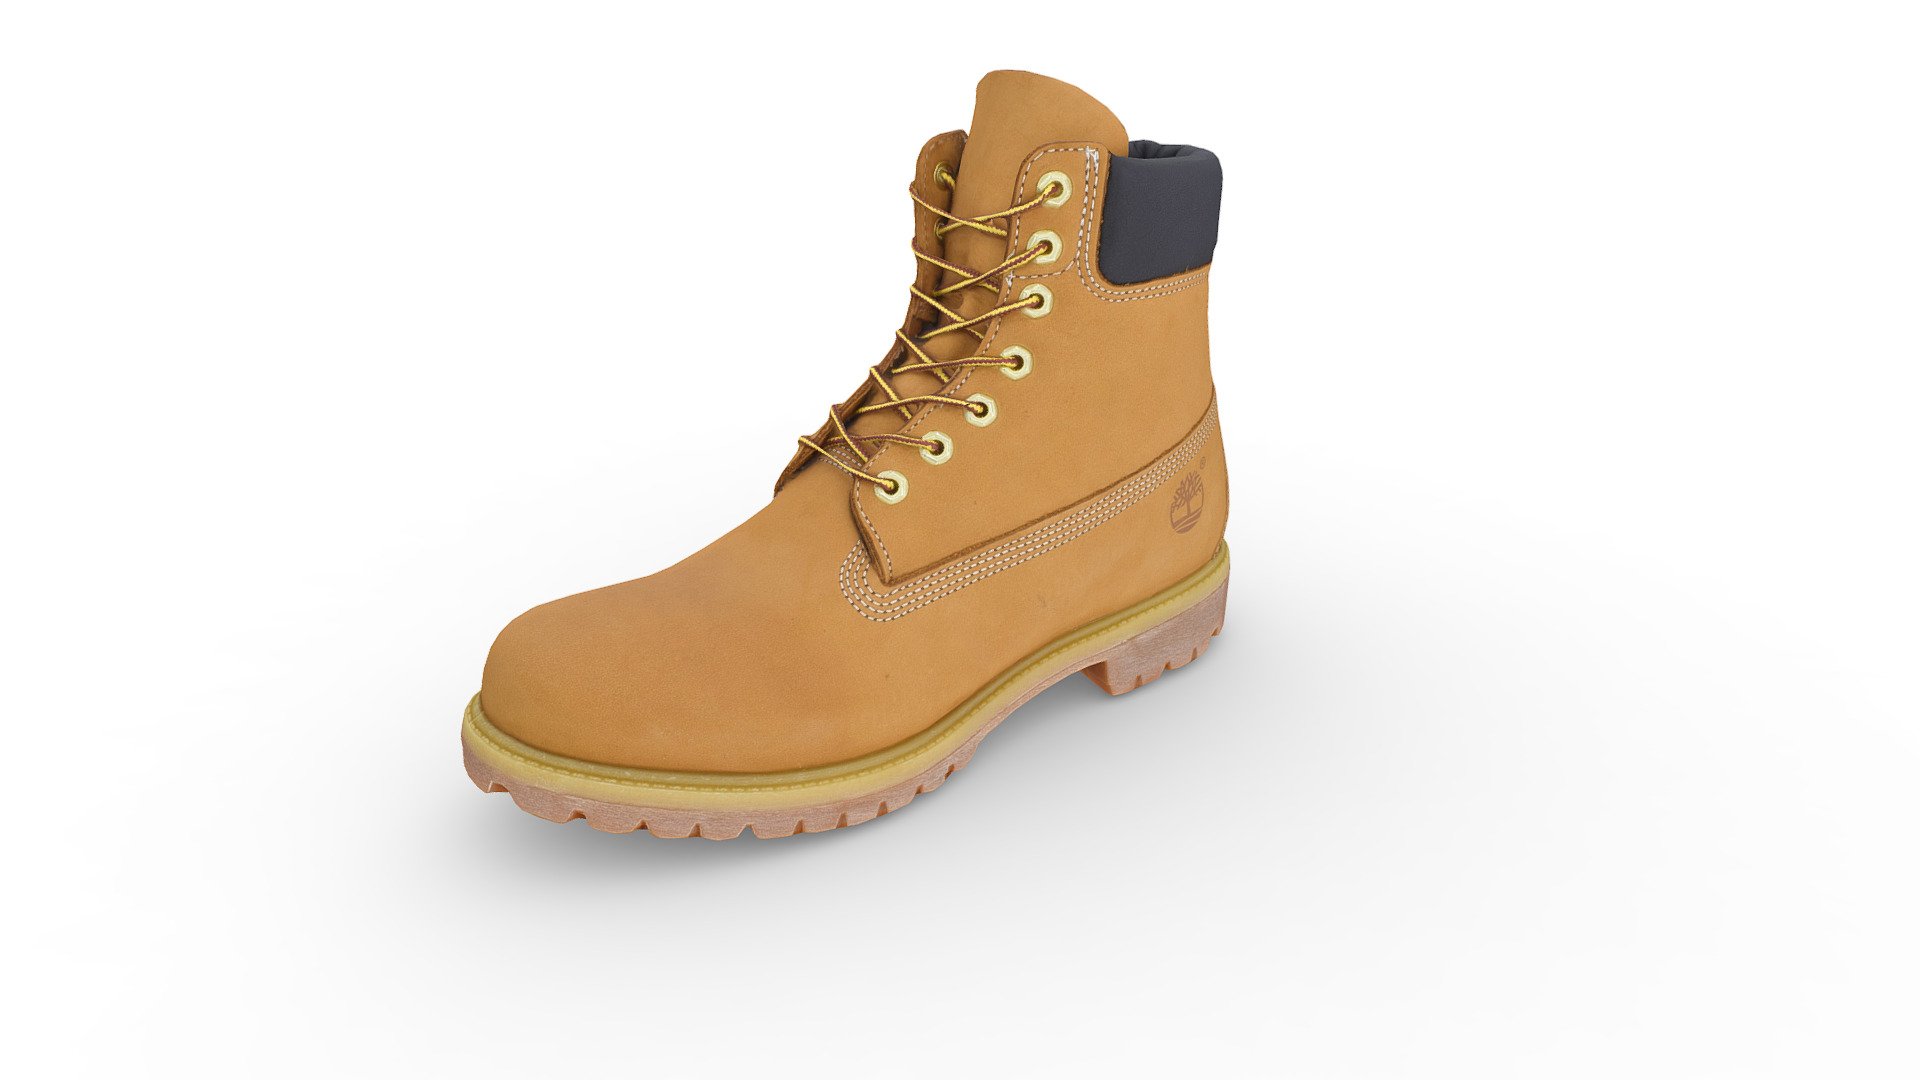 Timberland - MEN'S WATERPROOF BOOTS - 3D model by canersoyer (@canersoyer) [384188a]